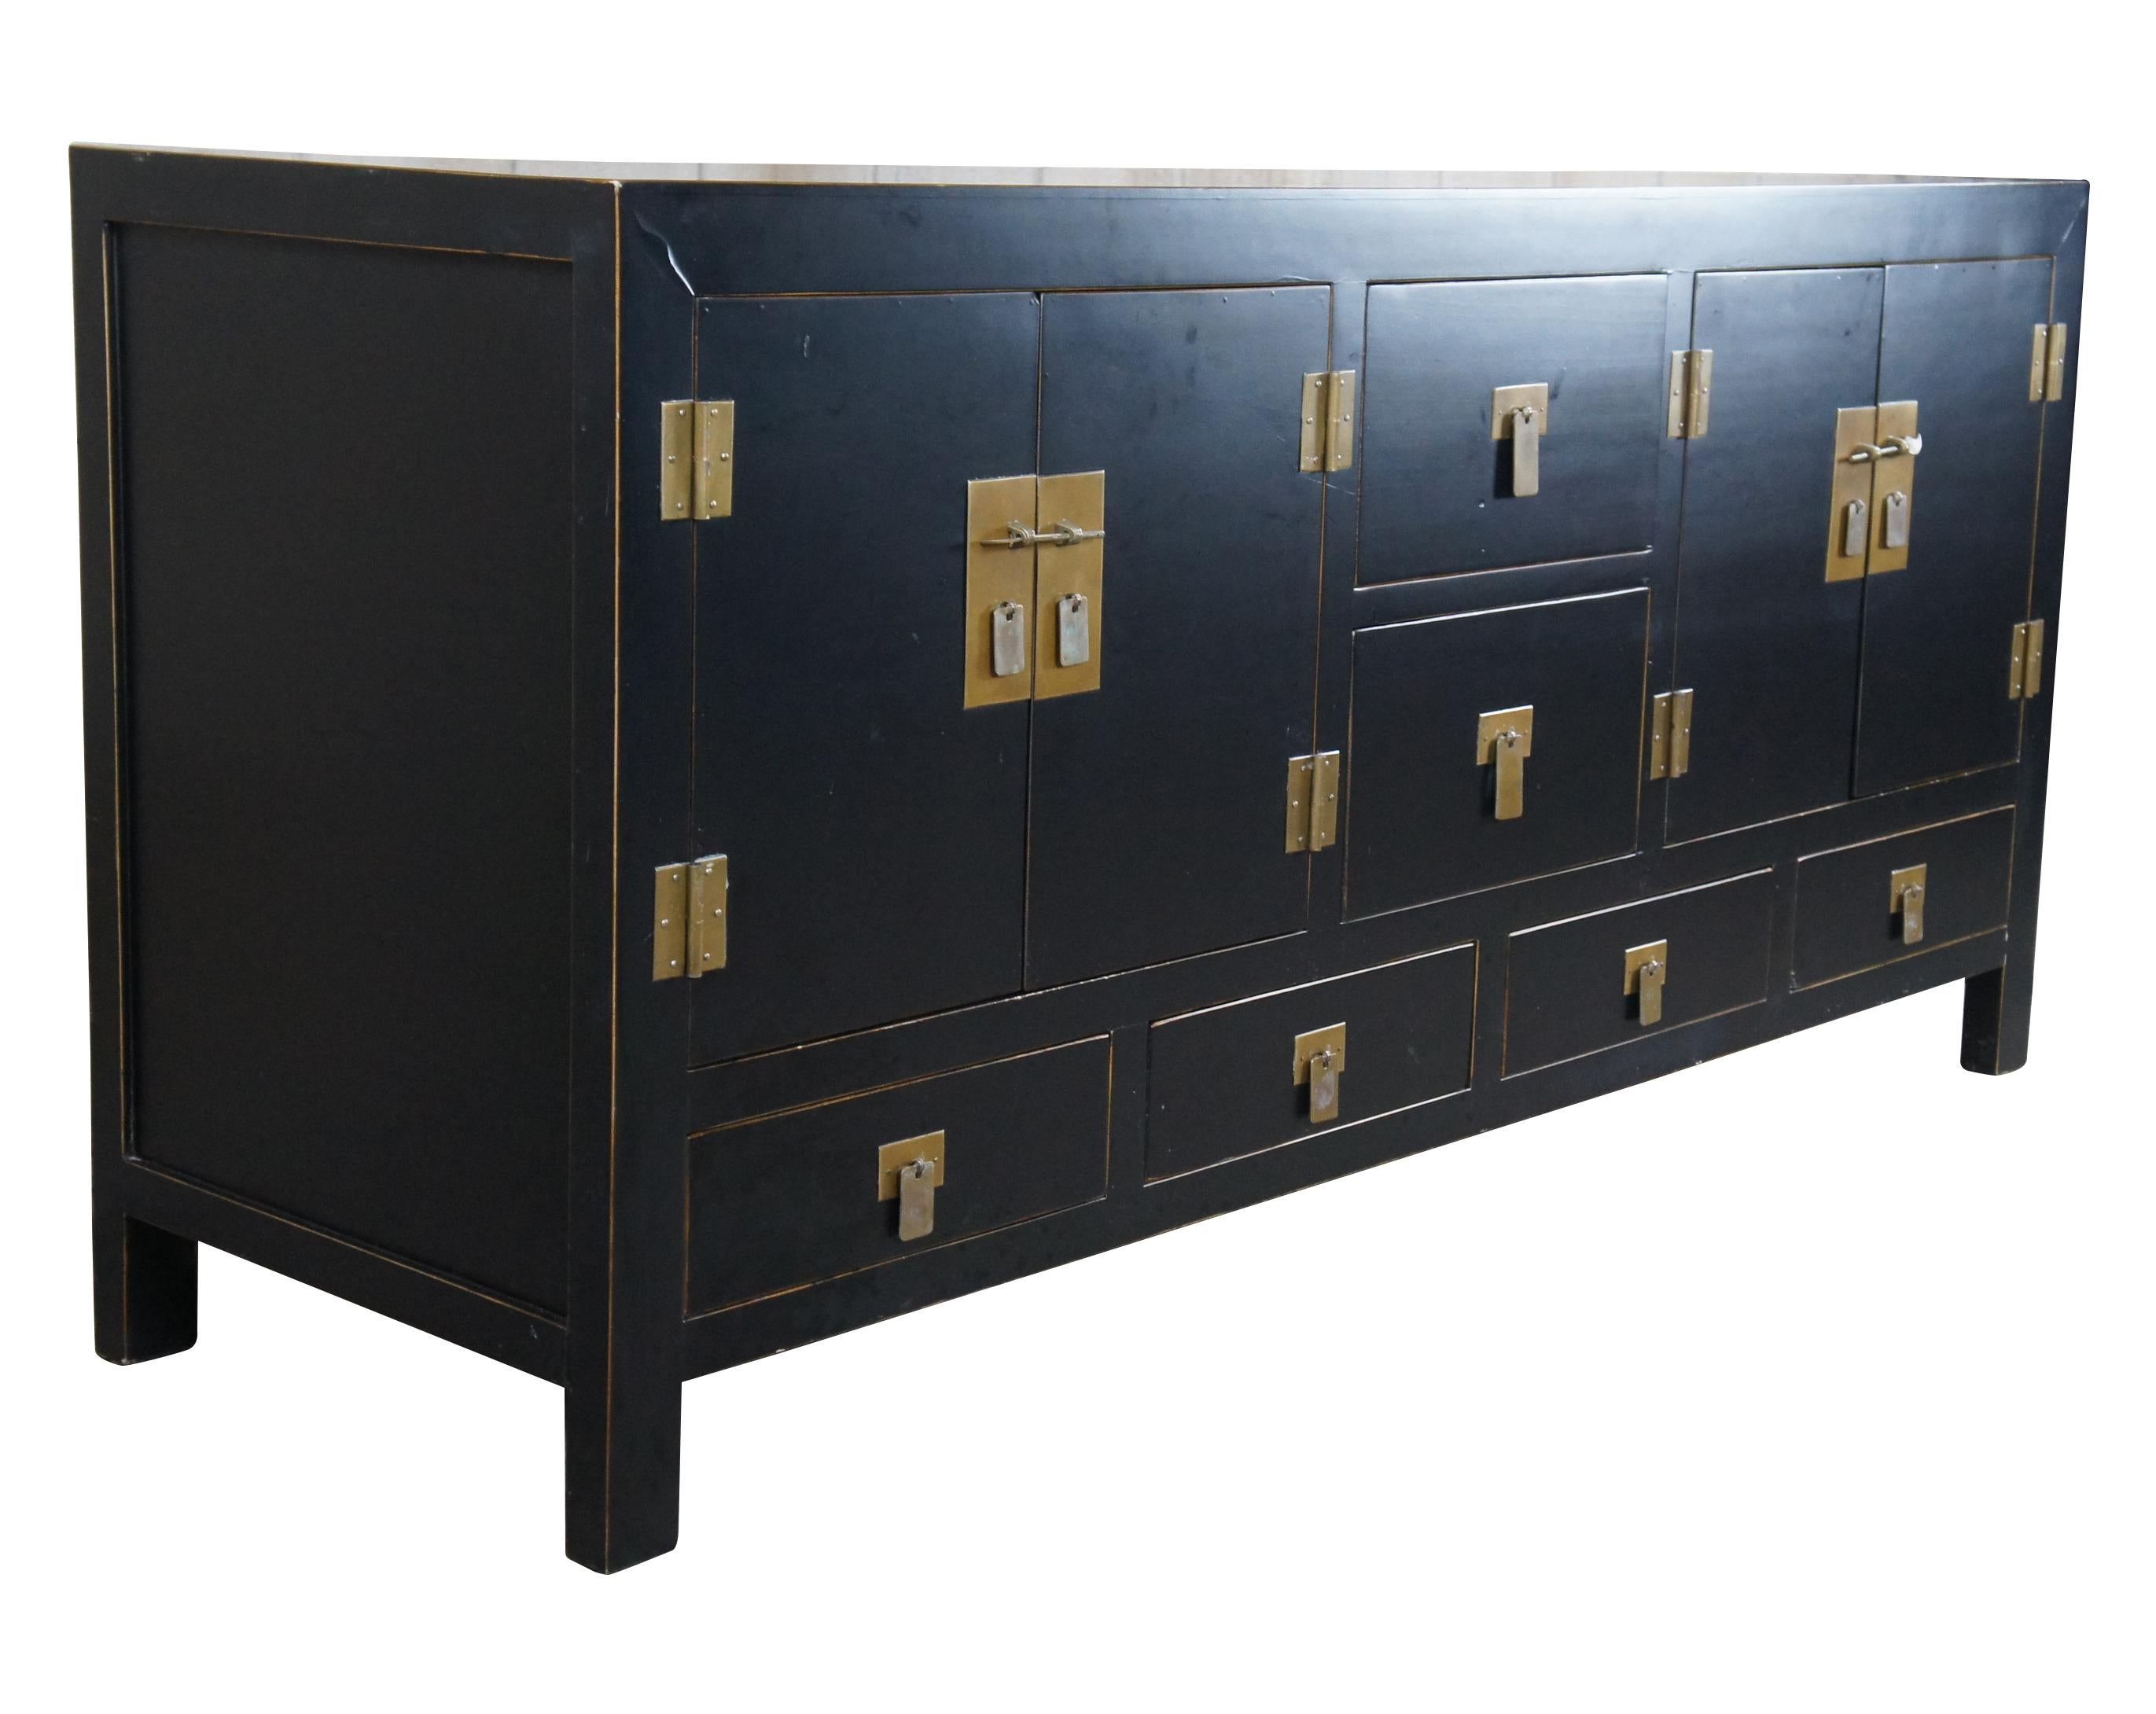 Late 20th century chinoiserie elm sideboard. Features a rectangular form finished in black with brass hardware. Includes two central drawers flanked by outer cabinets with interior shelves and four accessory drawers below. A versatile piece that